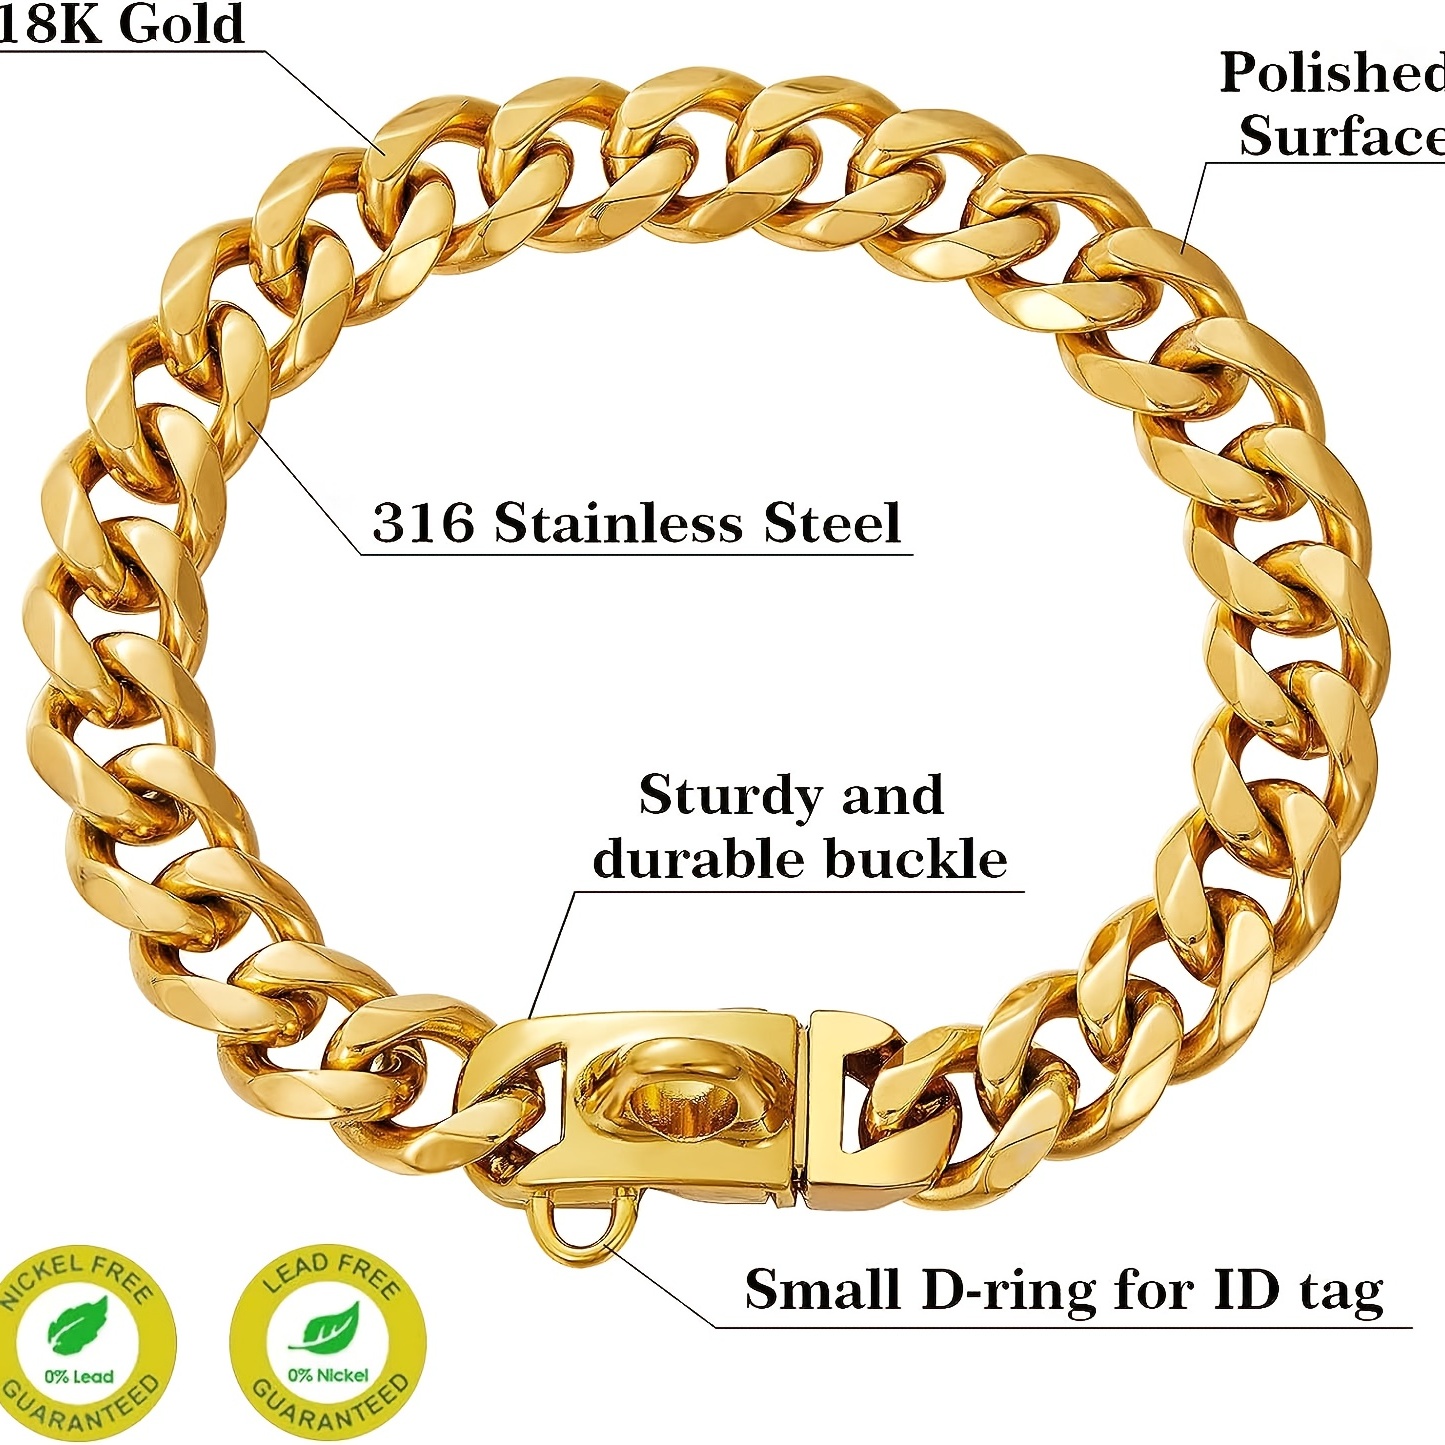 Gold Dog Chain Collar Stainless Steel 18K Gold Collar Adjustable Walking,  Metal Cuban Link Chew Proof Double Row Chain for Large Small Medium Dogs